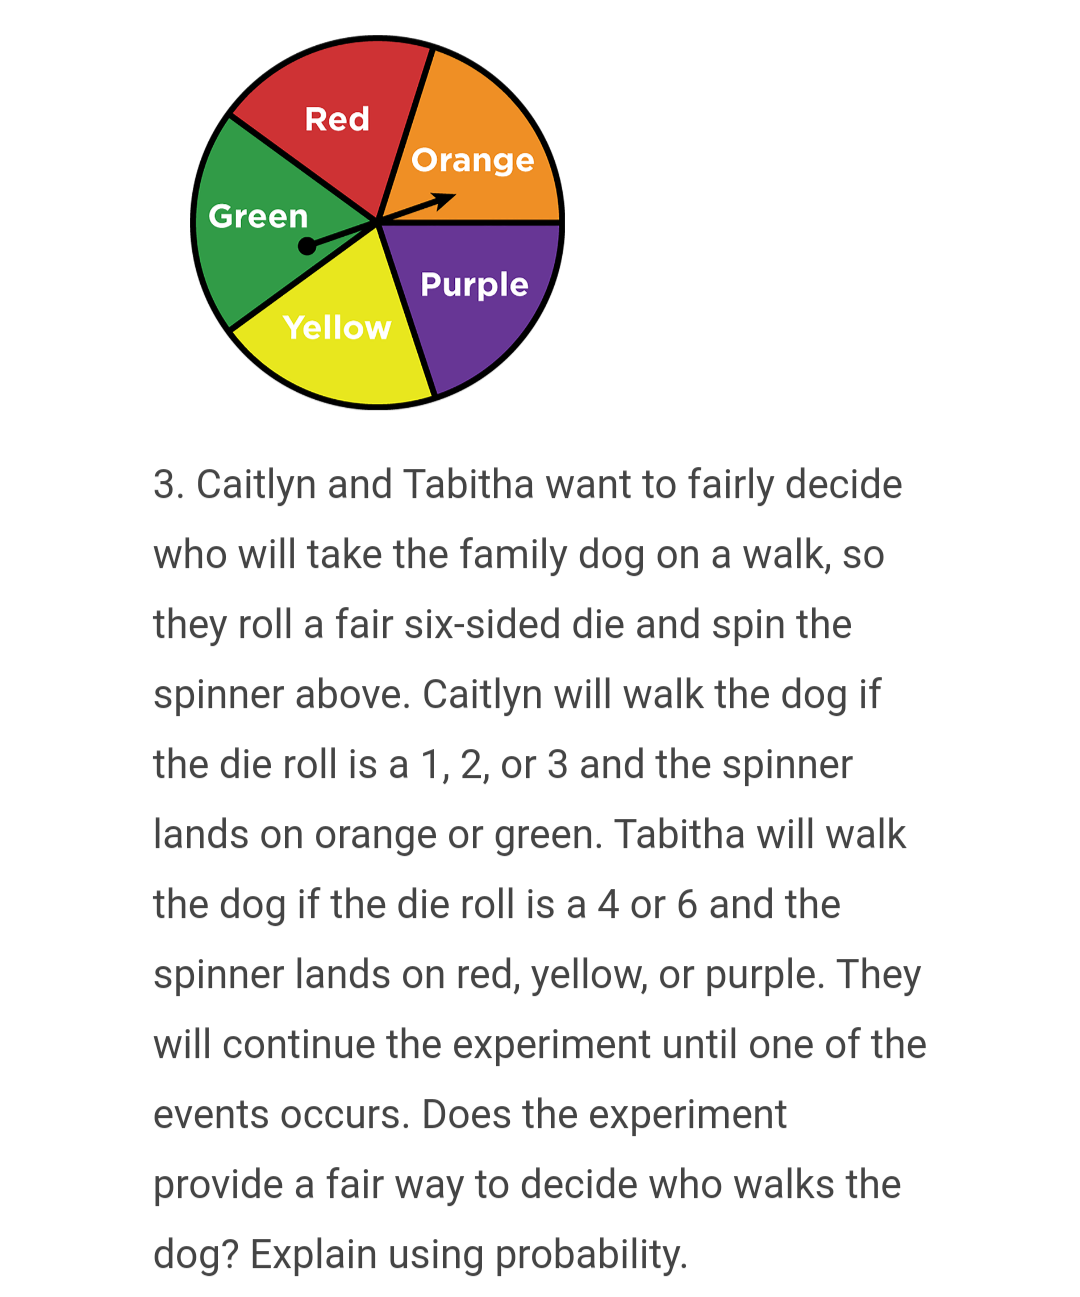 Green
Red
Orange
Purple
Yellow
3. Caitlyn and Tabitha want to fairly decide
who will take the family dog on a walk, so
they roll a fair six-sided die and spin the
spinner above. Caitlyn will walk the dog if
the die roll is a 1, 2, or 3 and the spinner
lands on orange or green. Tabitha will walk
the dog if the die roll is a 4 or 6 and the
spinner lands on red, yellow, or purple. They
will continue the experiment until one of the
events occurs. Does the experiment
provide a fair way to decide who walks the
dog? Explain using probability.